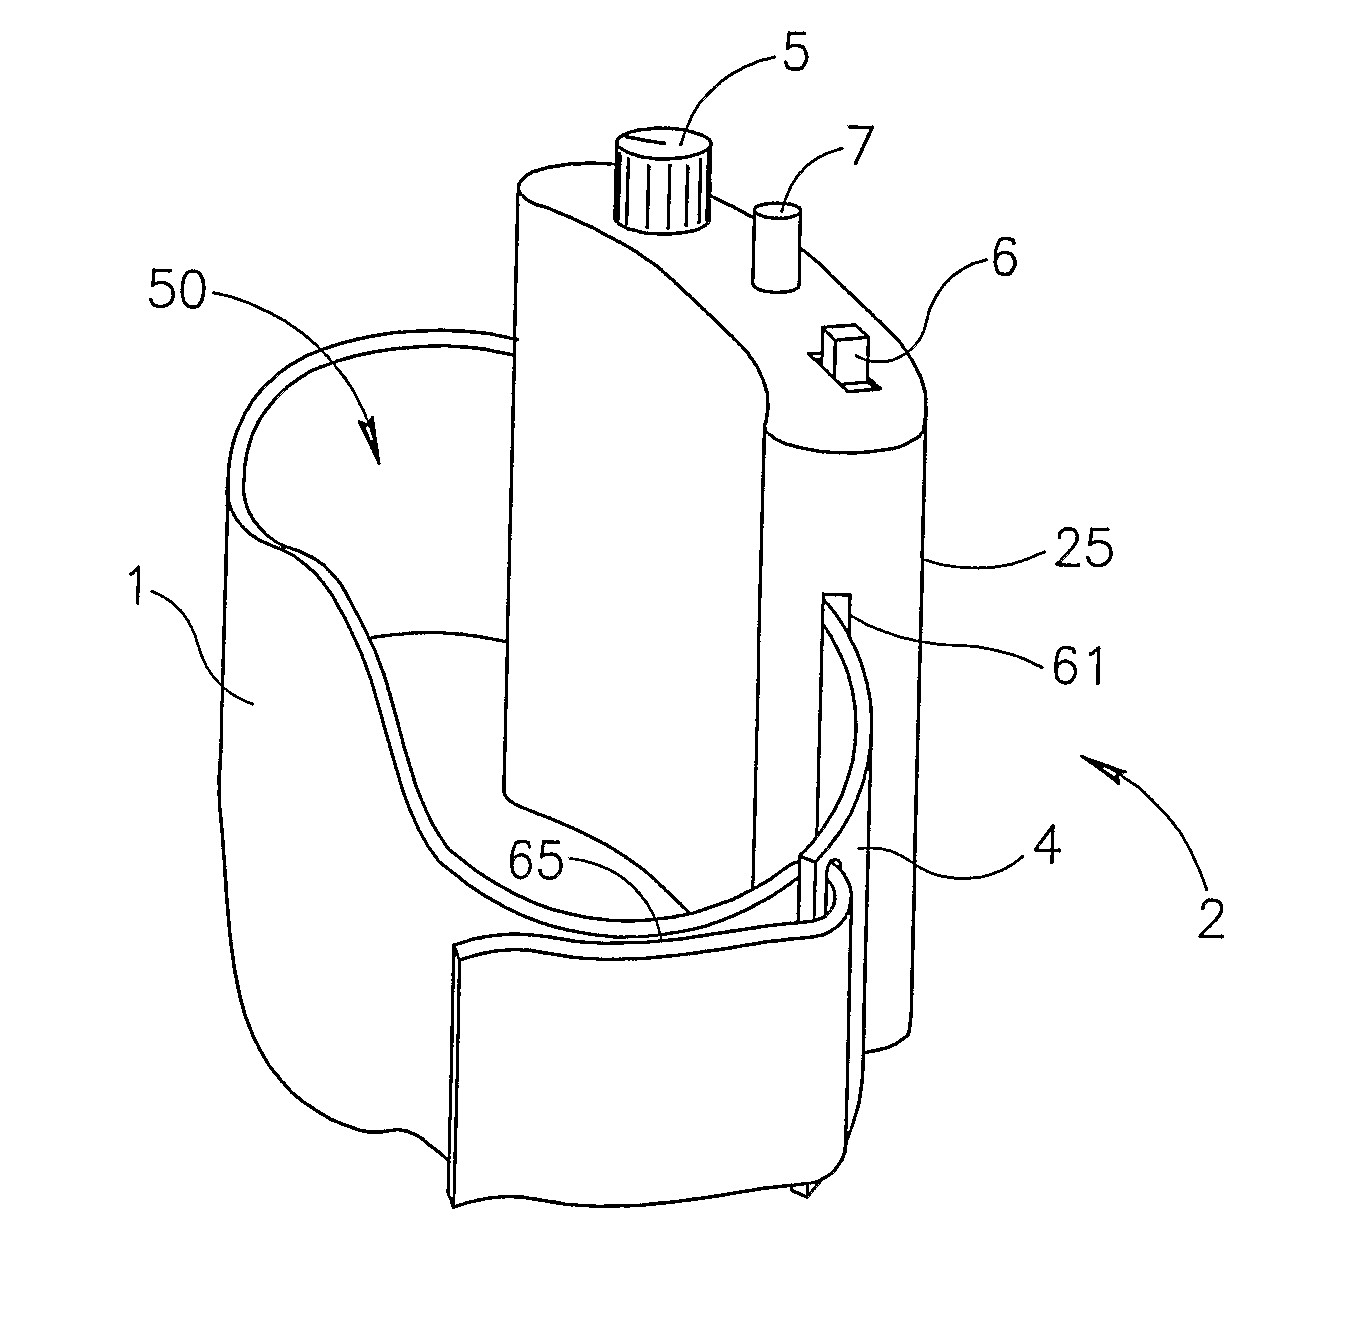 Computerized portable device for the enhancement of circulation